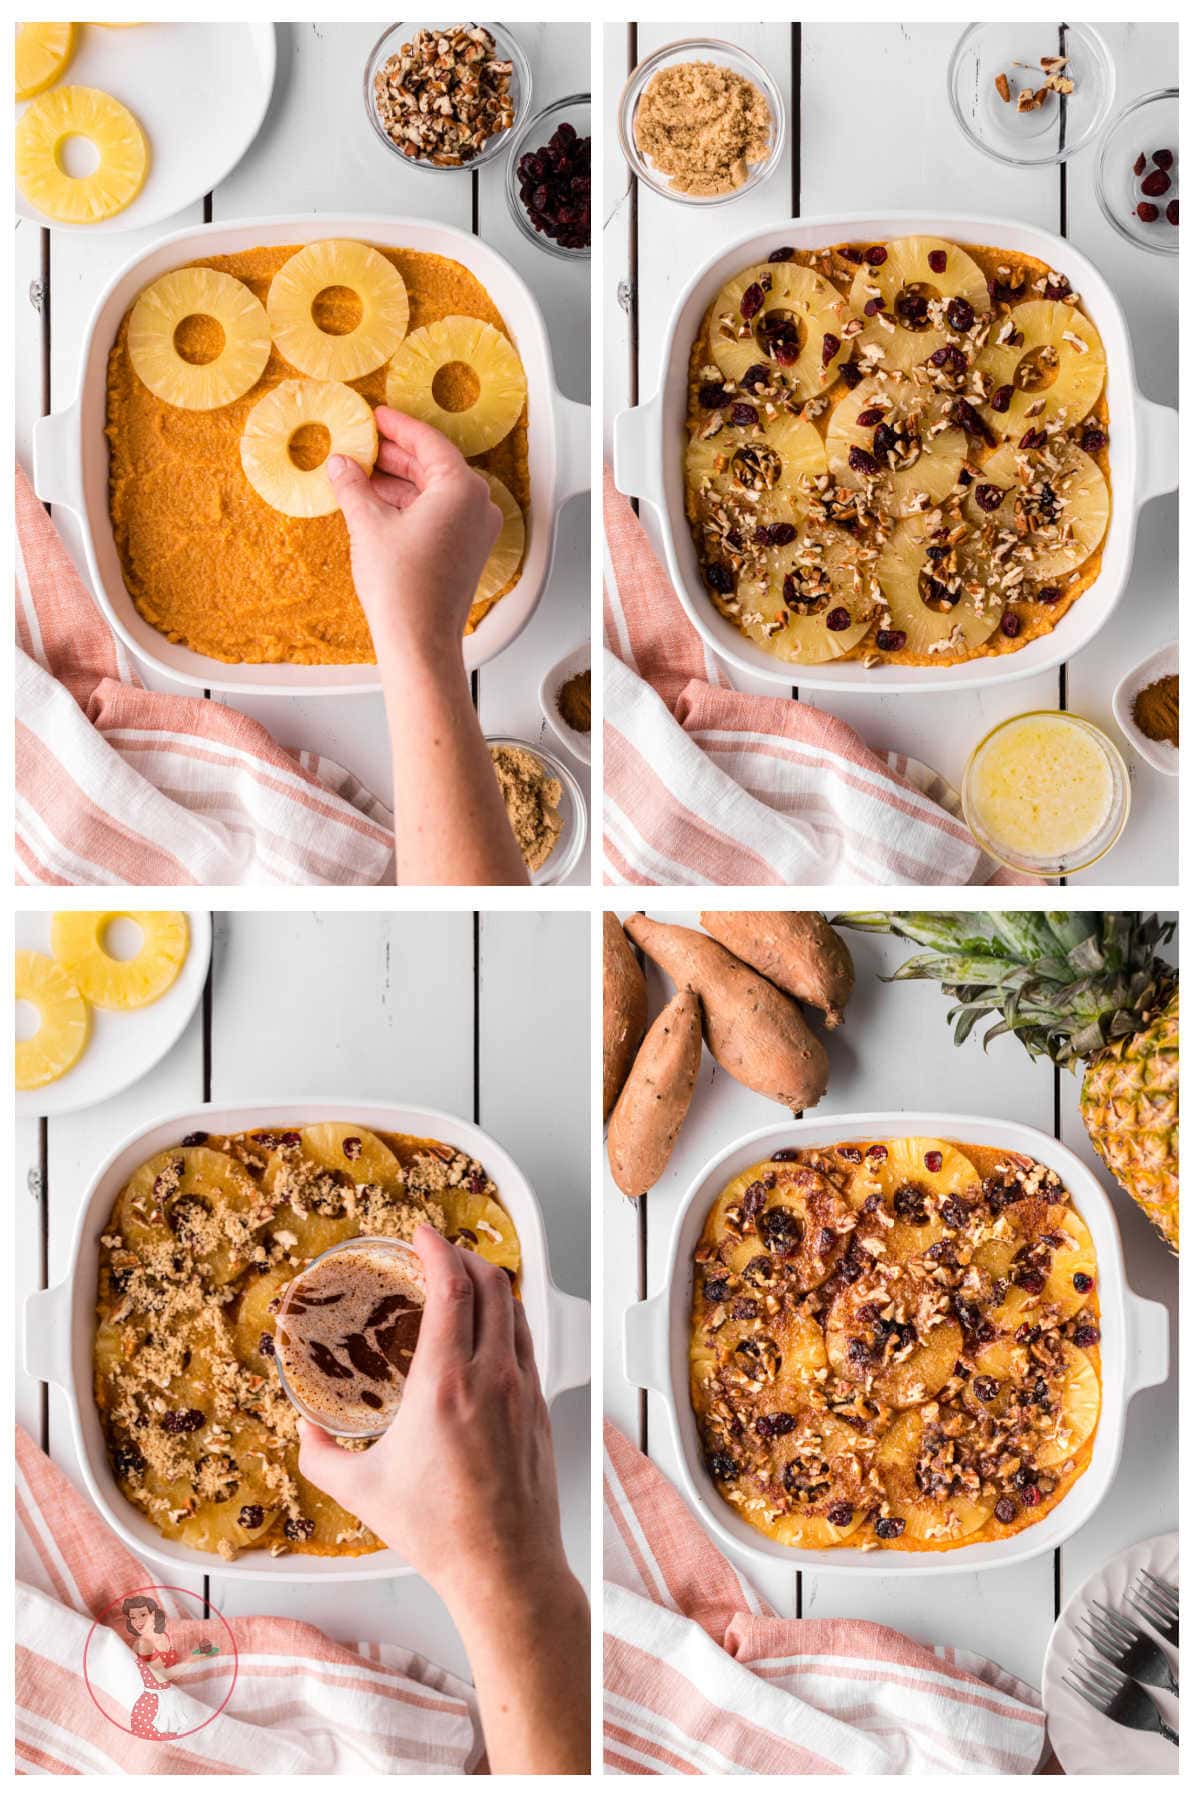 Step by step images showing how to make pineapple sweet potato casserole.